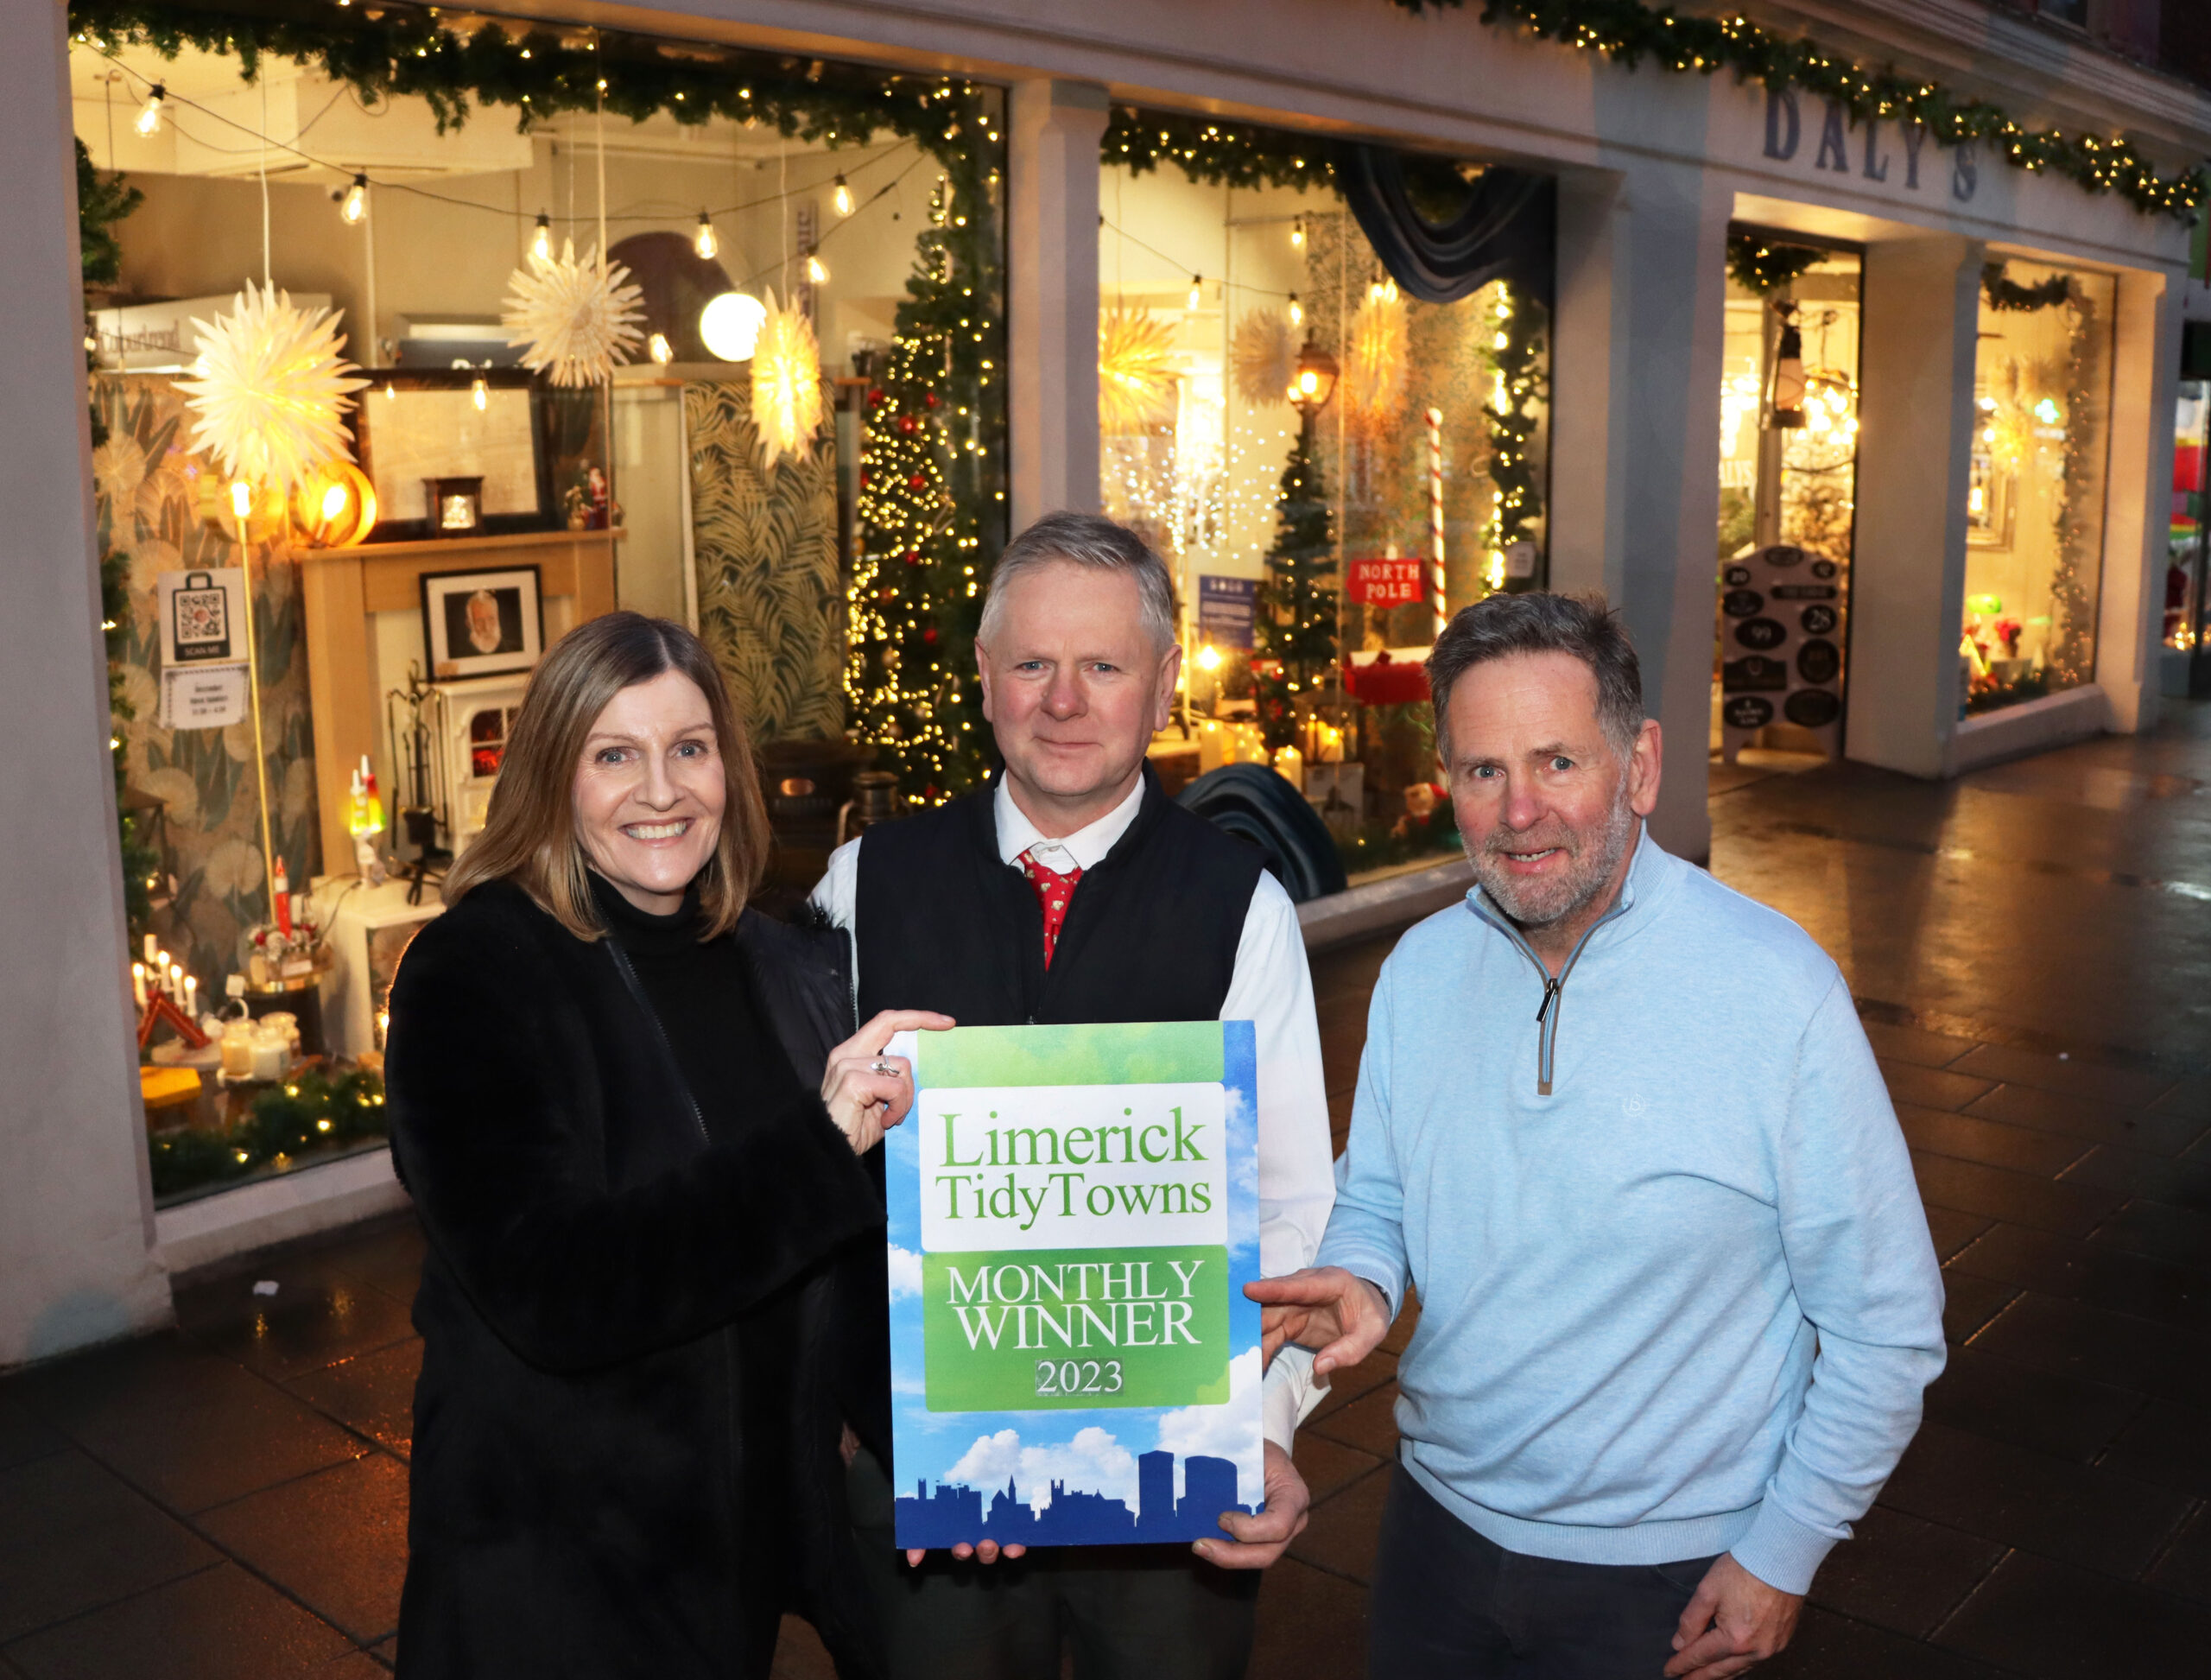 Limerick City Tidy Towns’ sixth and final bi-monthly award for 2023 has gone to Daly’s Hardware & Electrical, at 50-51 William Street